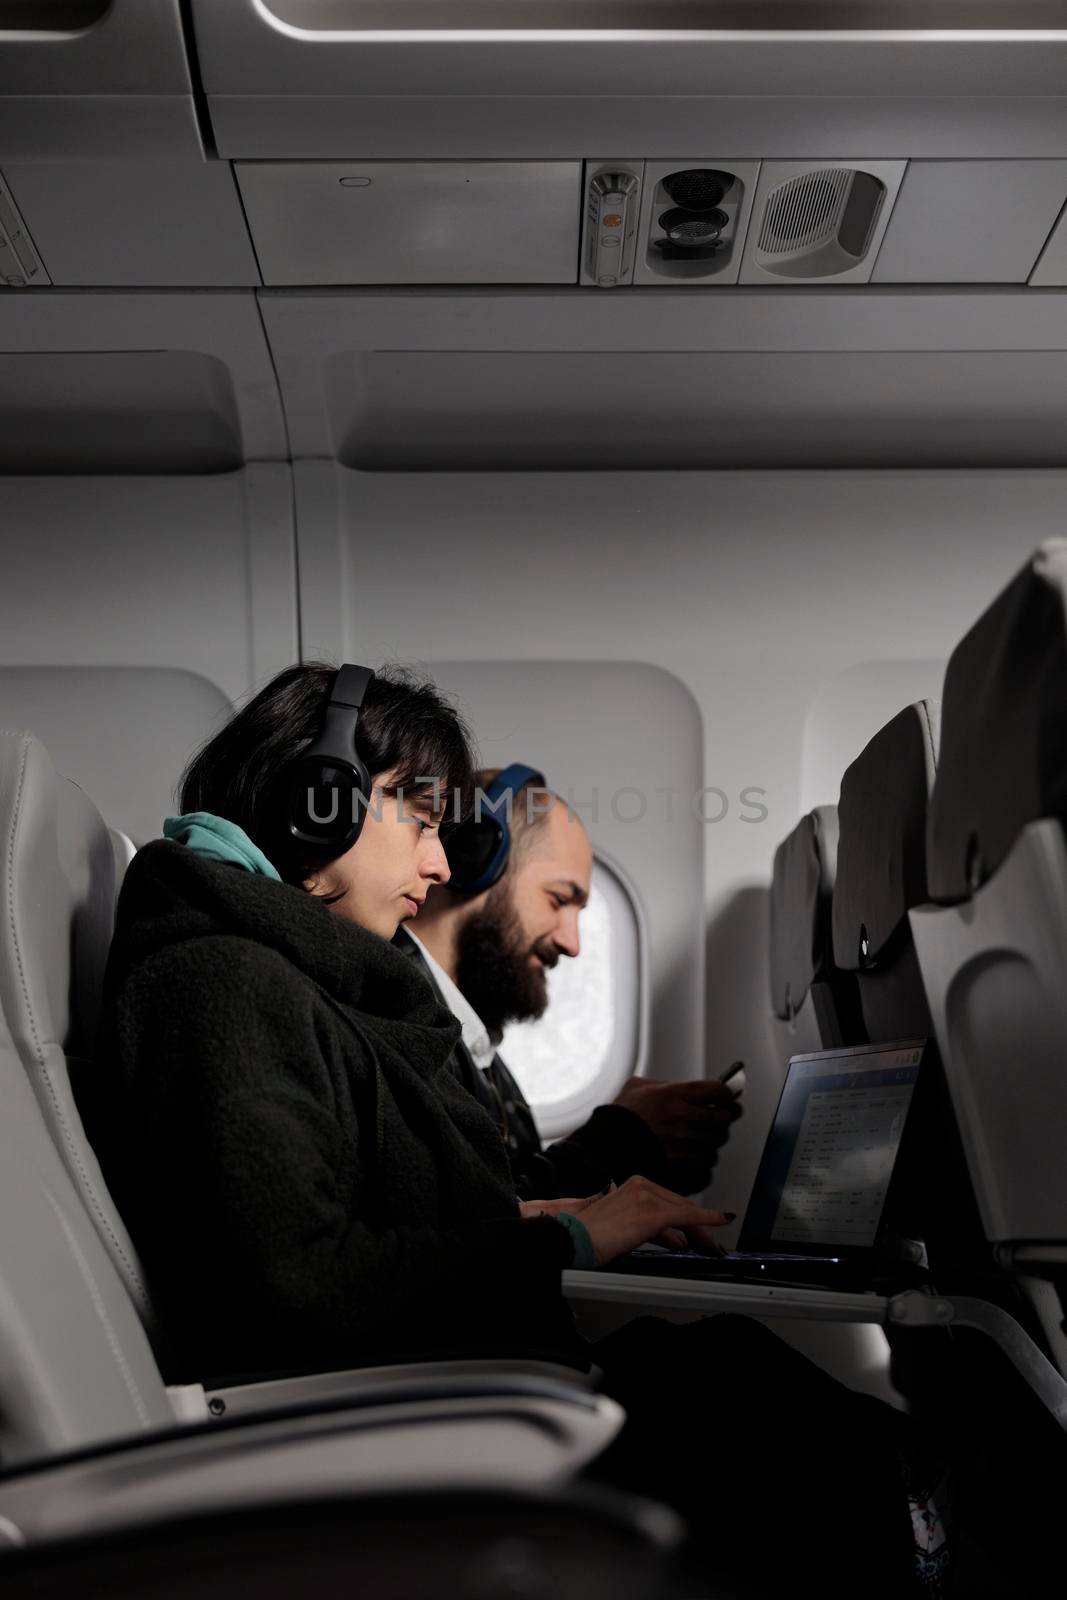 Man and woman using laptop and smartphone on airplane flight, waiting to arrive at holiday vacation. Couple of passengers working on devices and travelling with international airline.